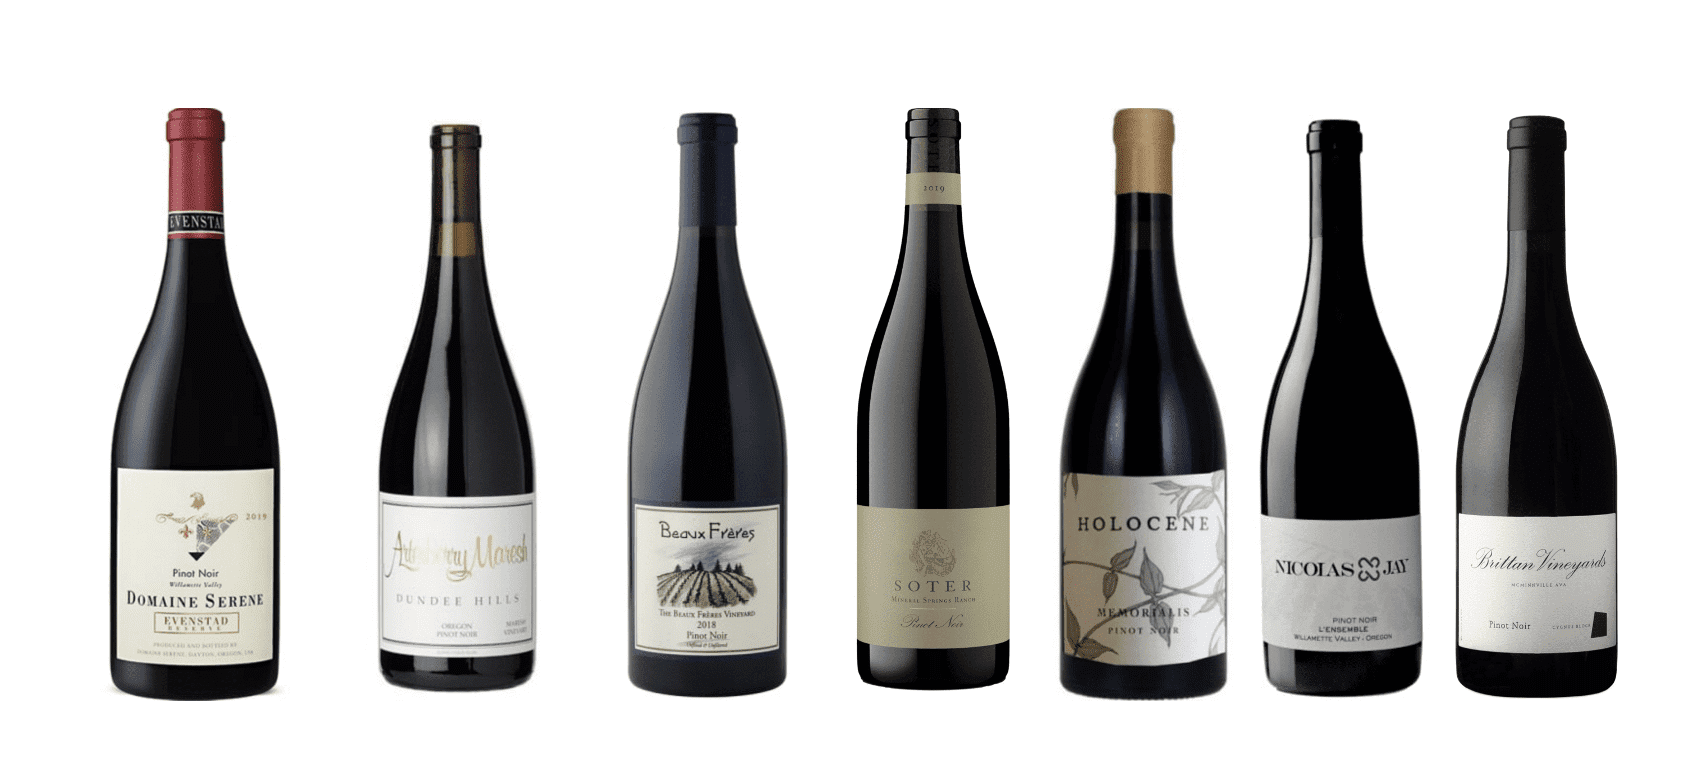 best-pinot-noirs-from-oregon